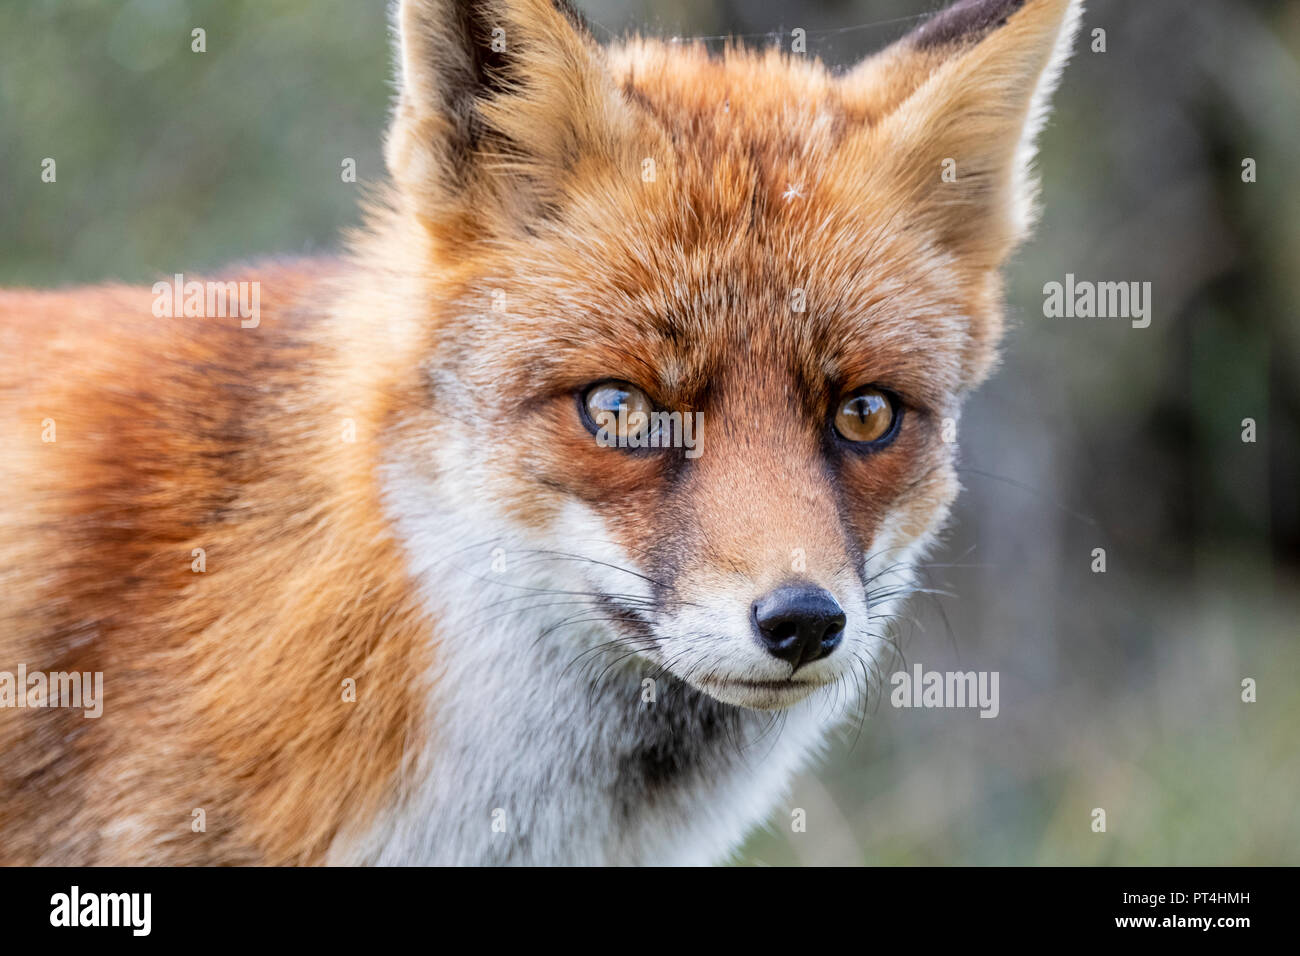 Head of a staring European red fox (Vulpes vulpes) close up Stock Photo